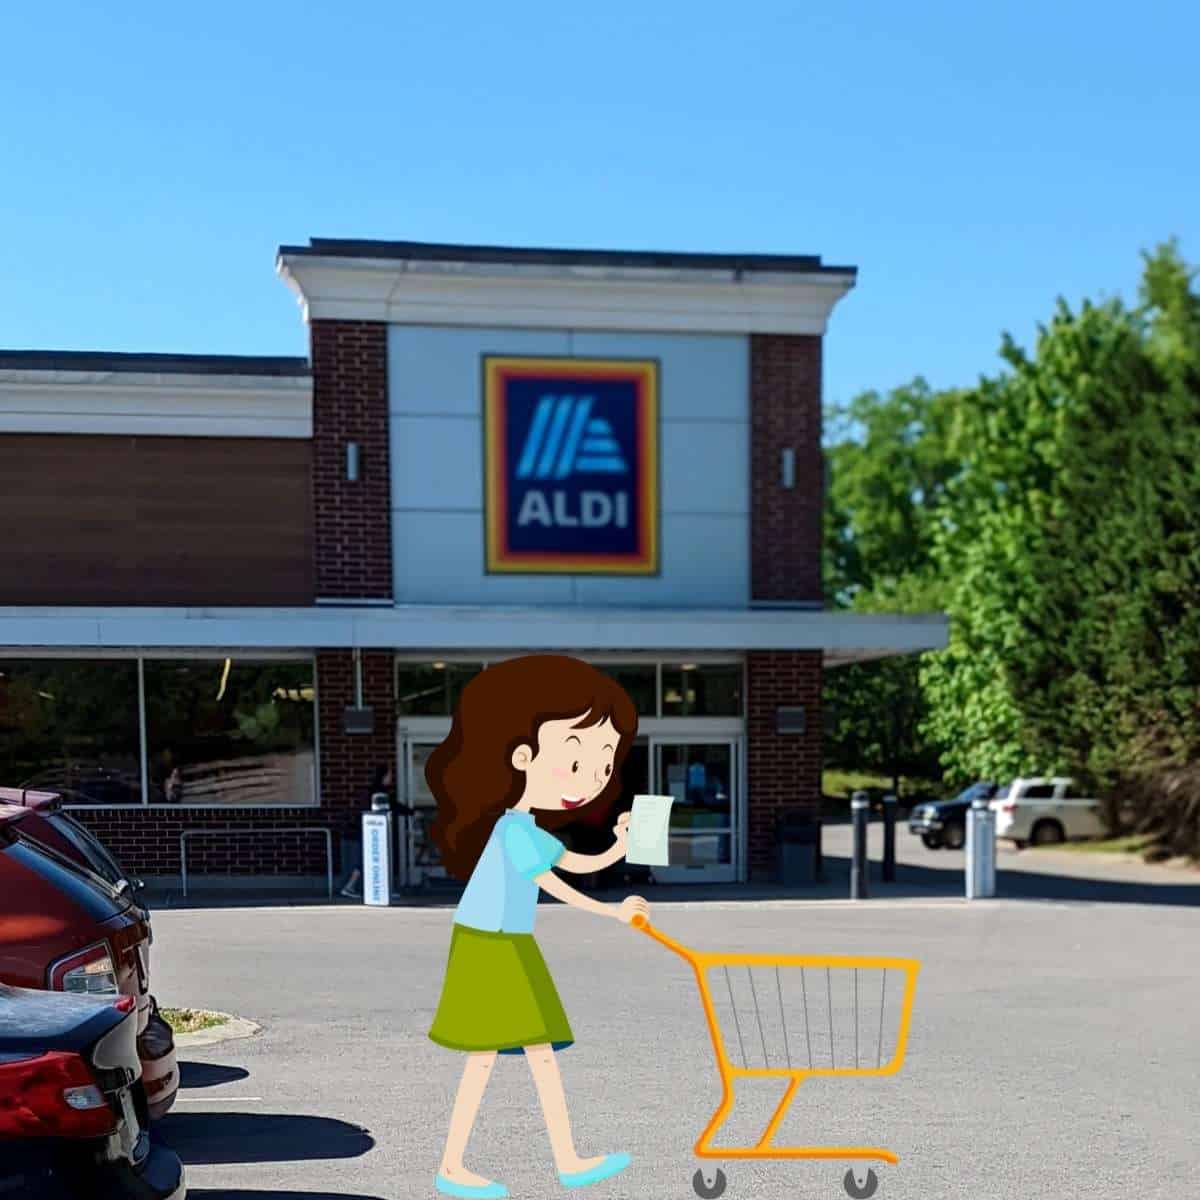 Aldi storefront with cartoon woman pushing a shopping cart in front of it.